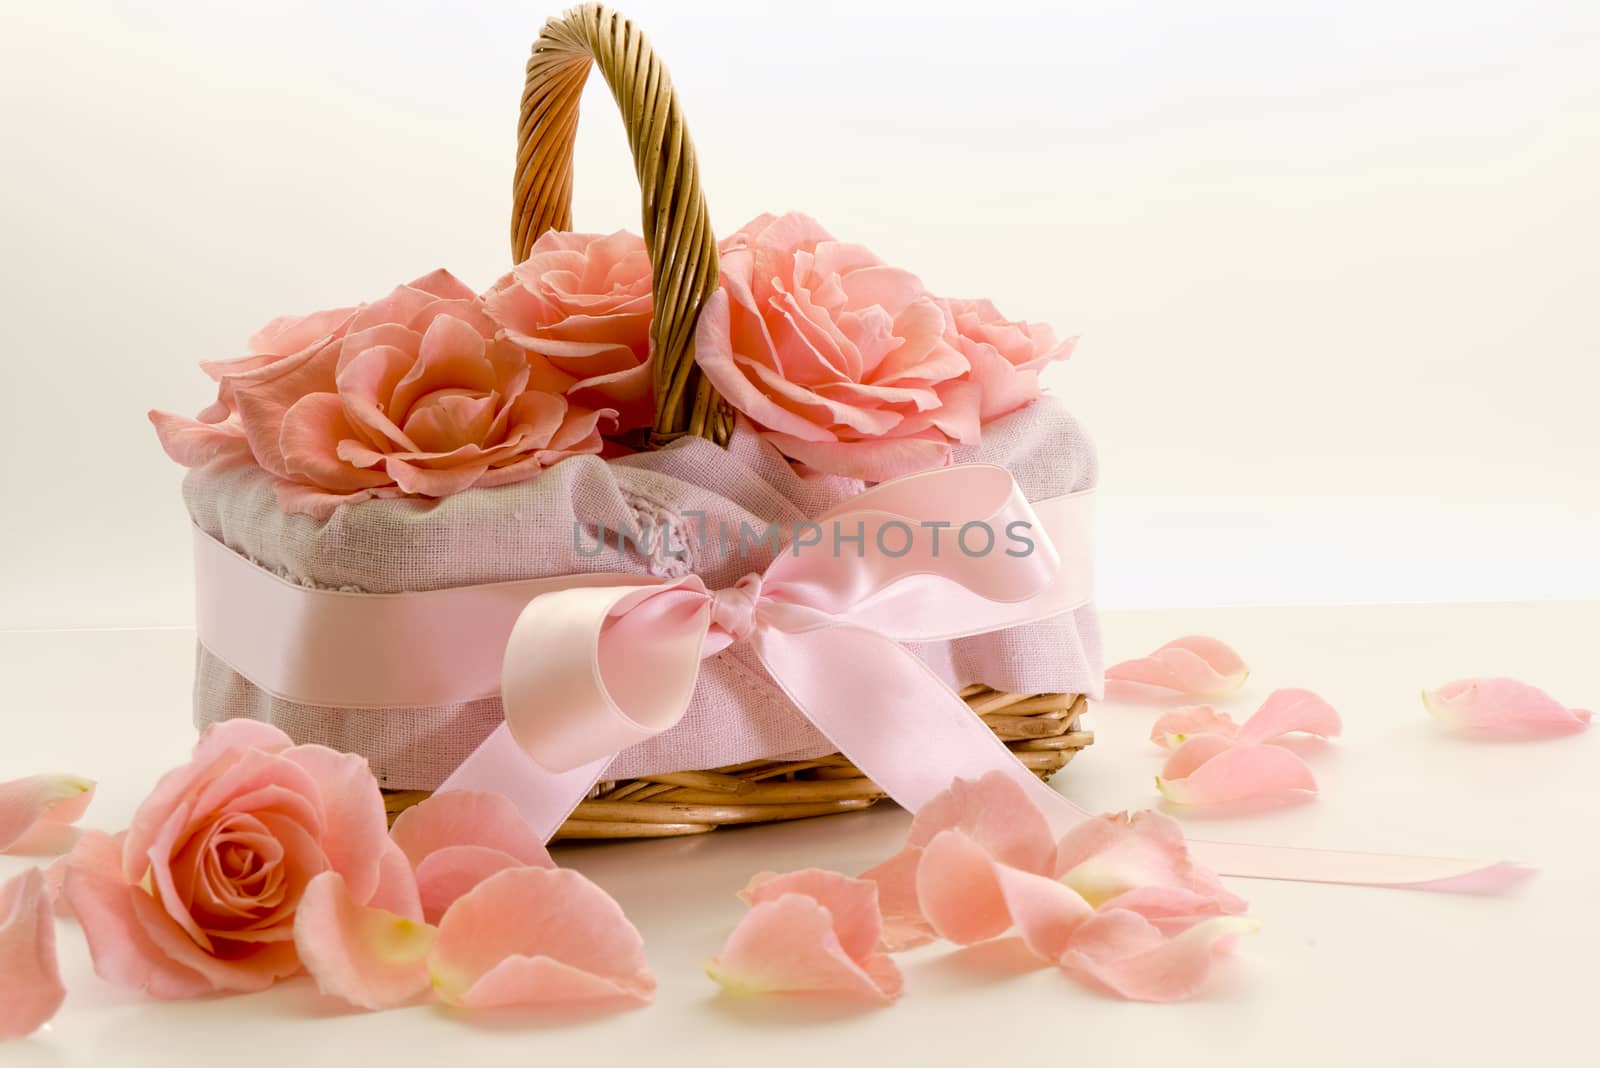 Basket with roses by p.studio66